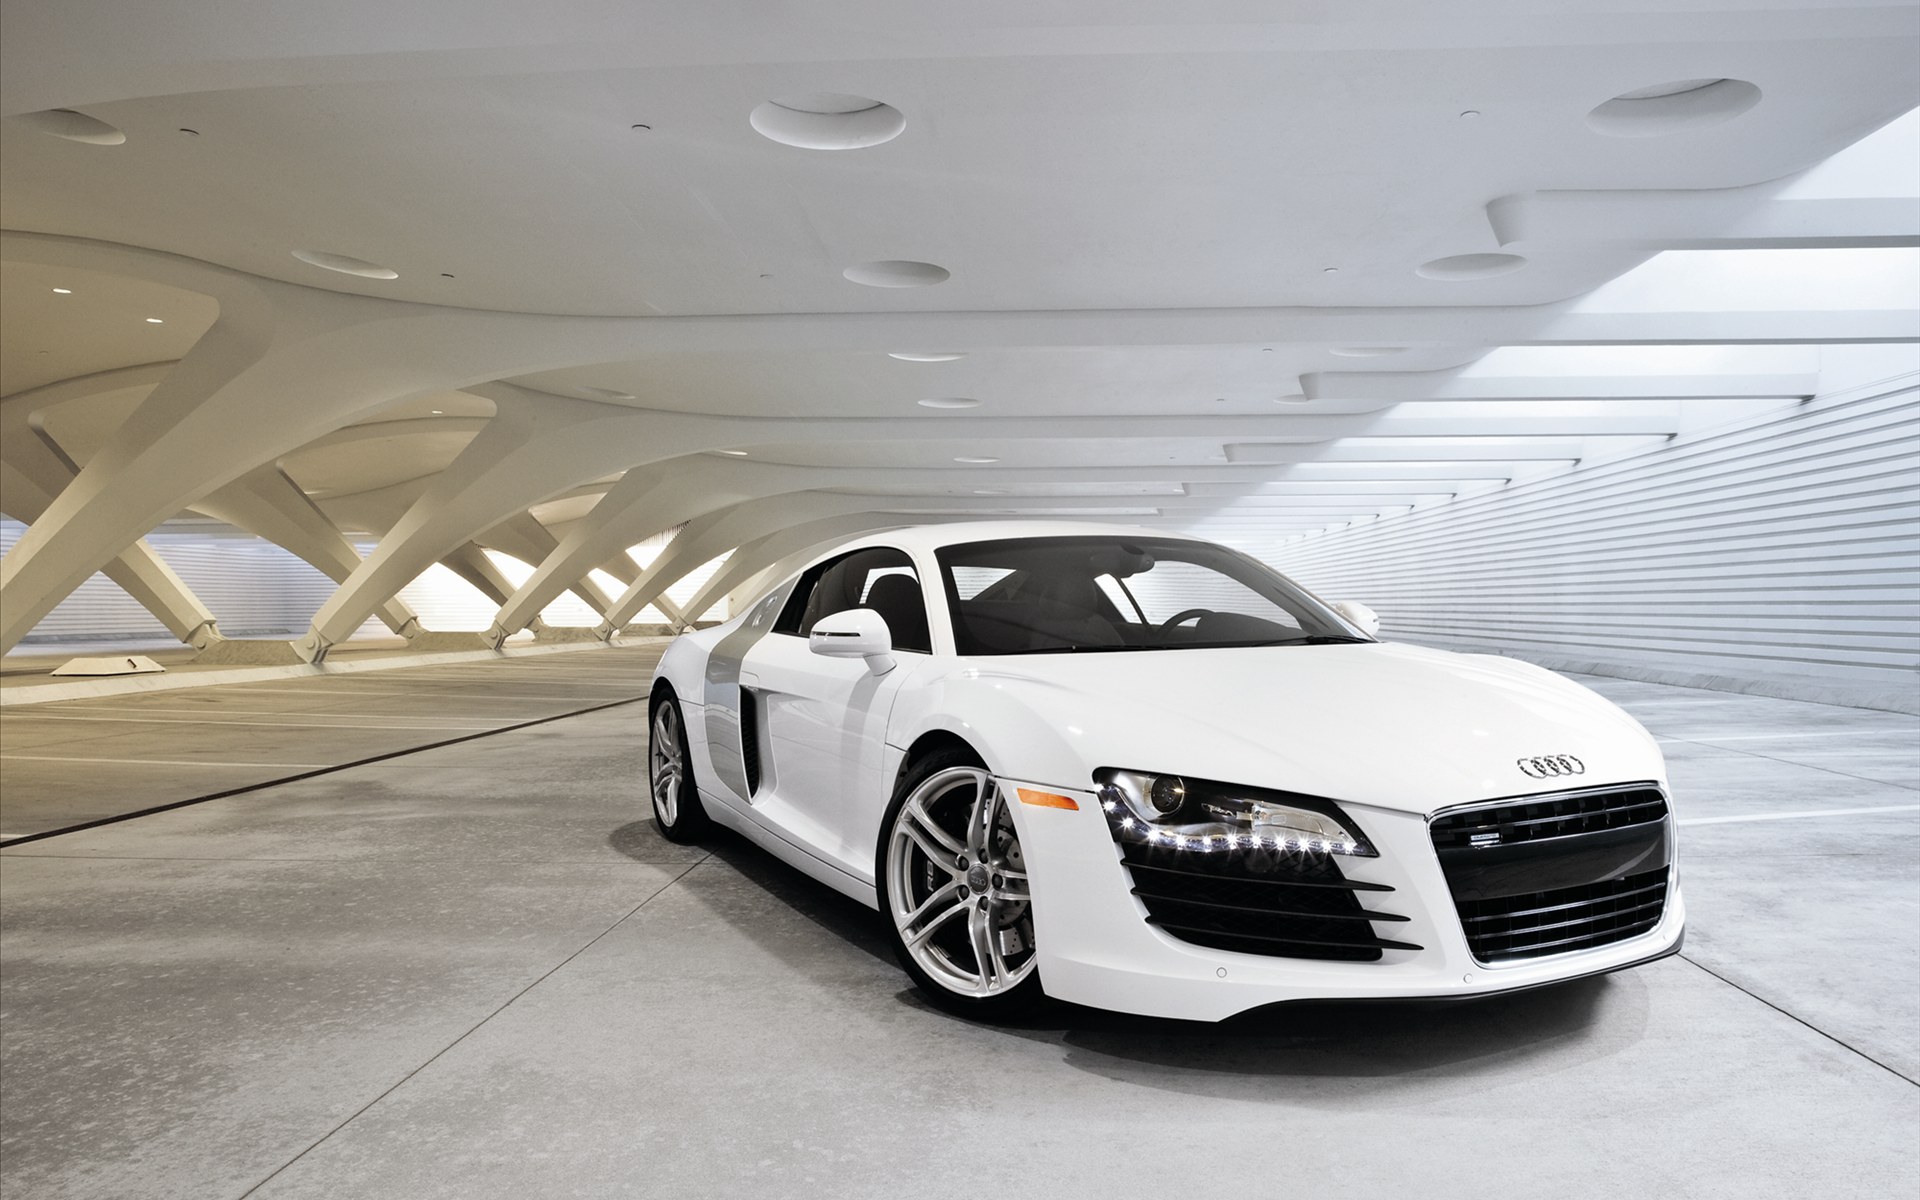 Free Wallpaper Of The Top Cars: A White Sports Car Audi R8 | Free